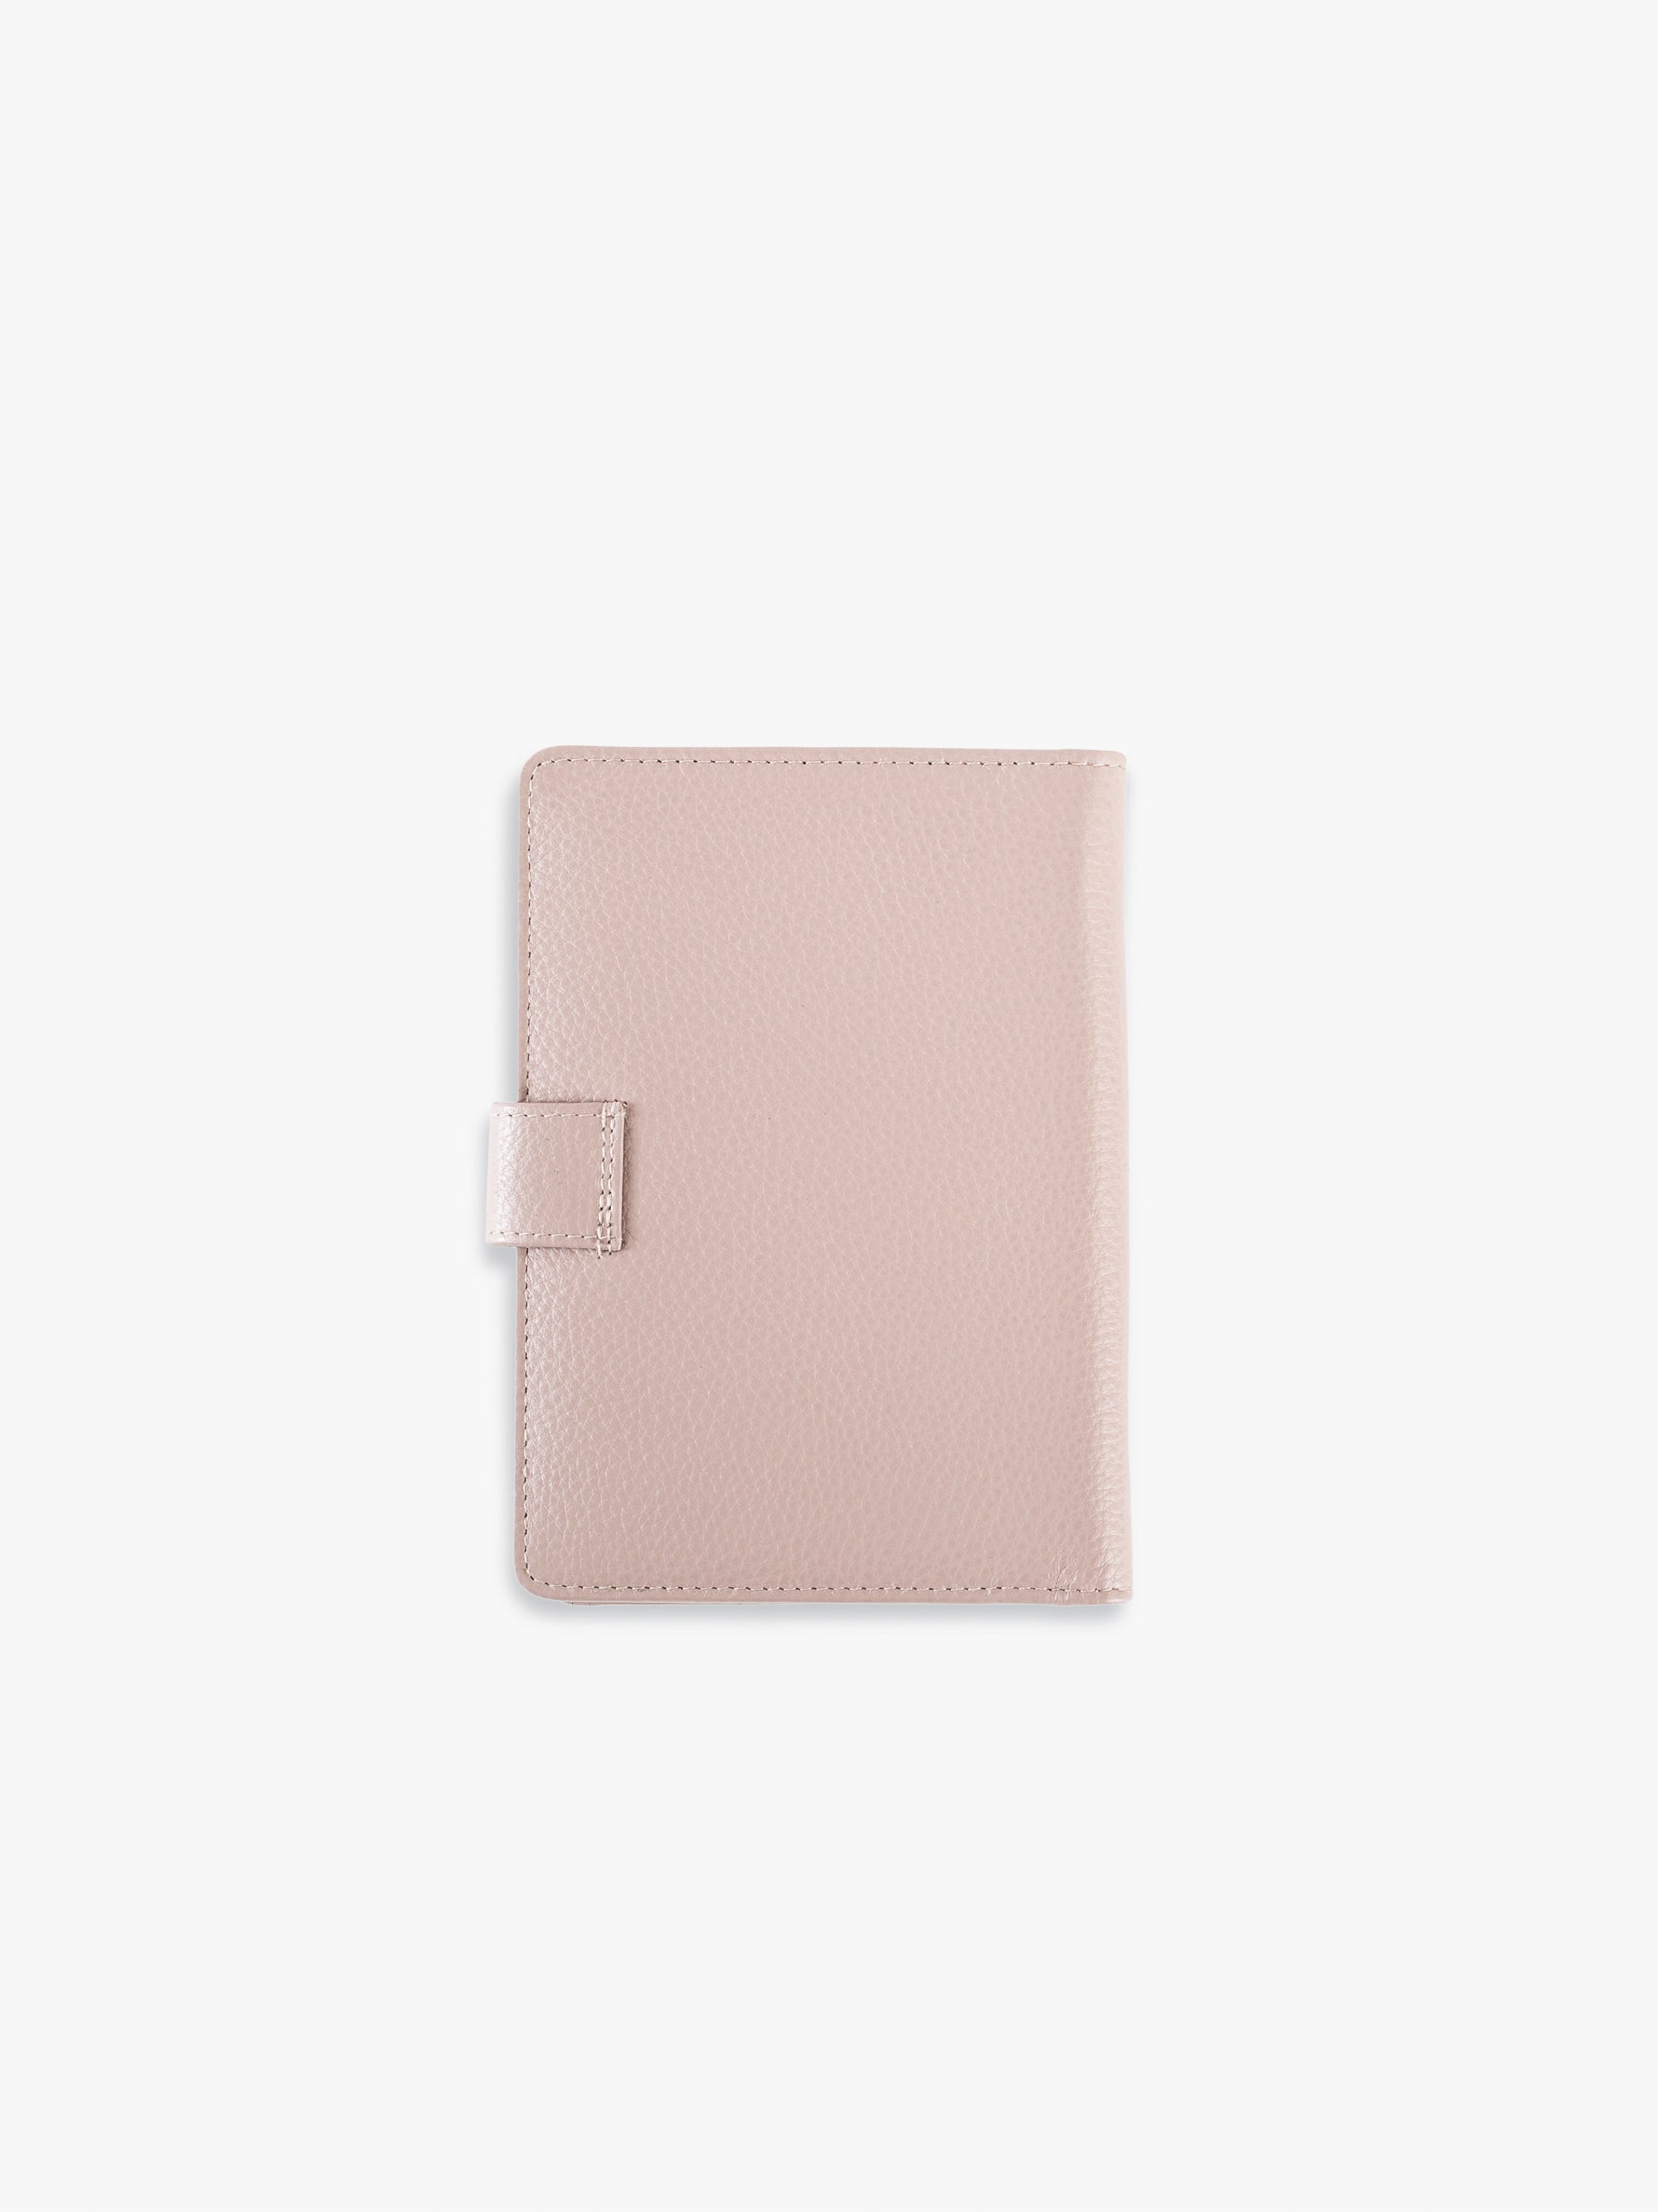 Handcrafted genuine leather Jetsetter Passport Case for women Nude Pink